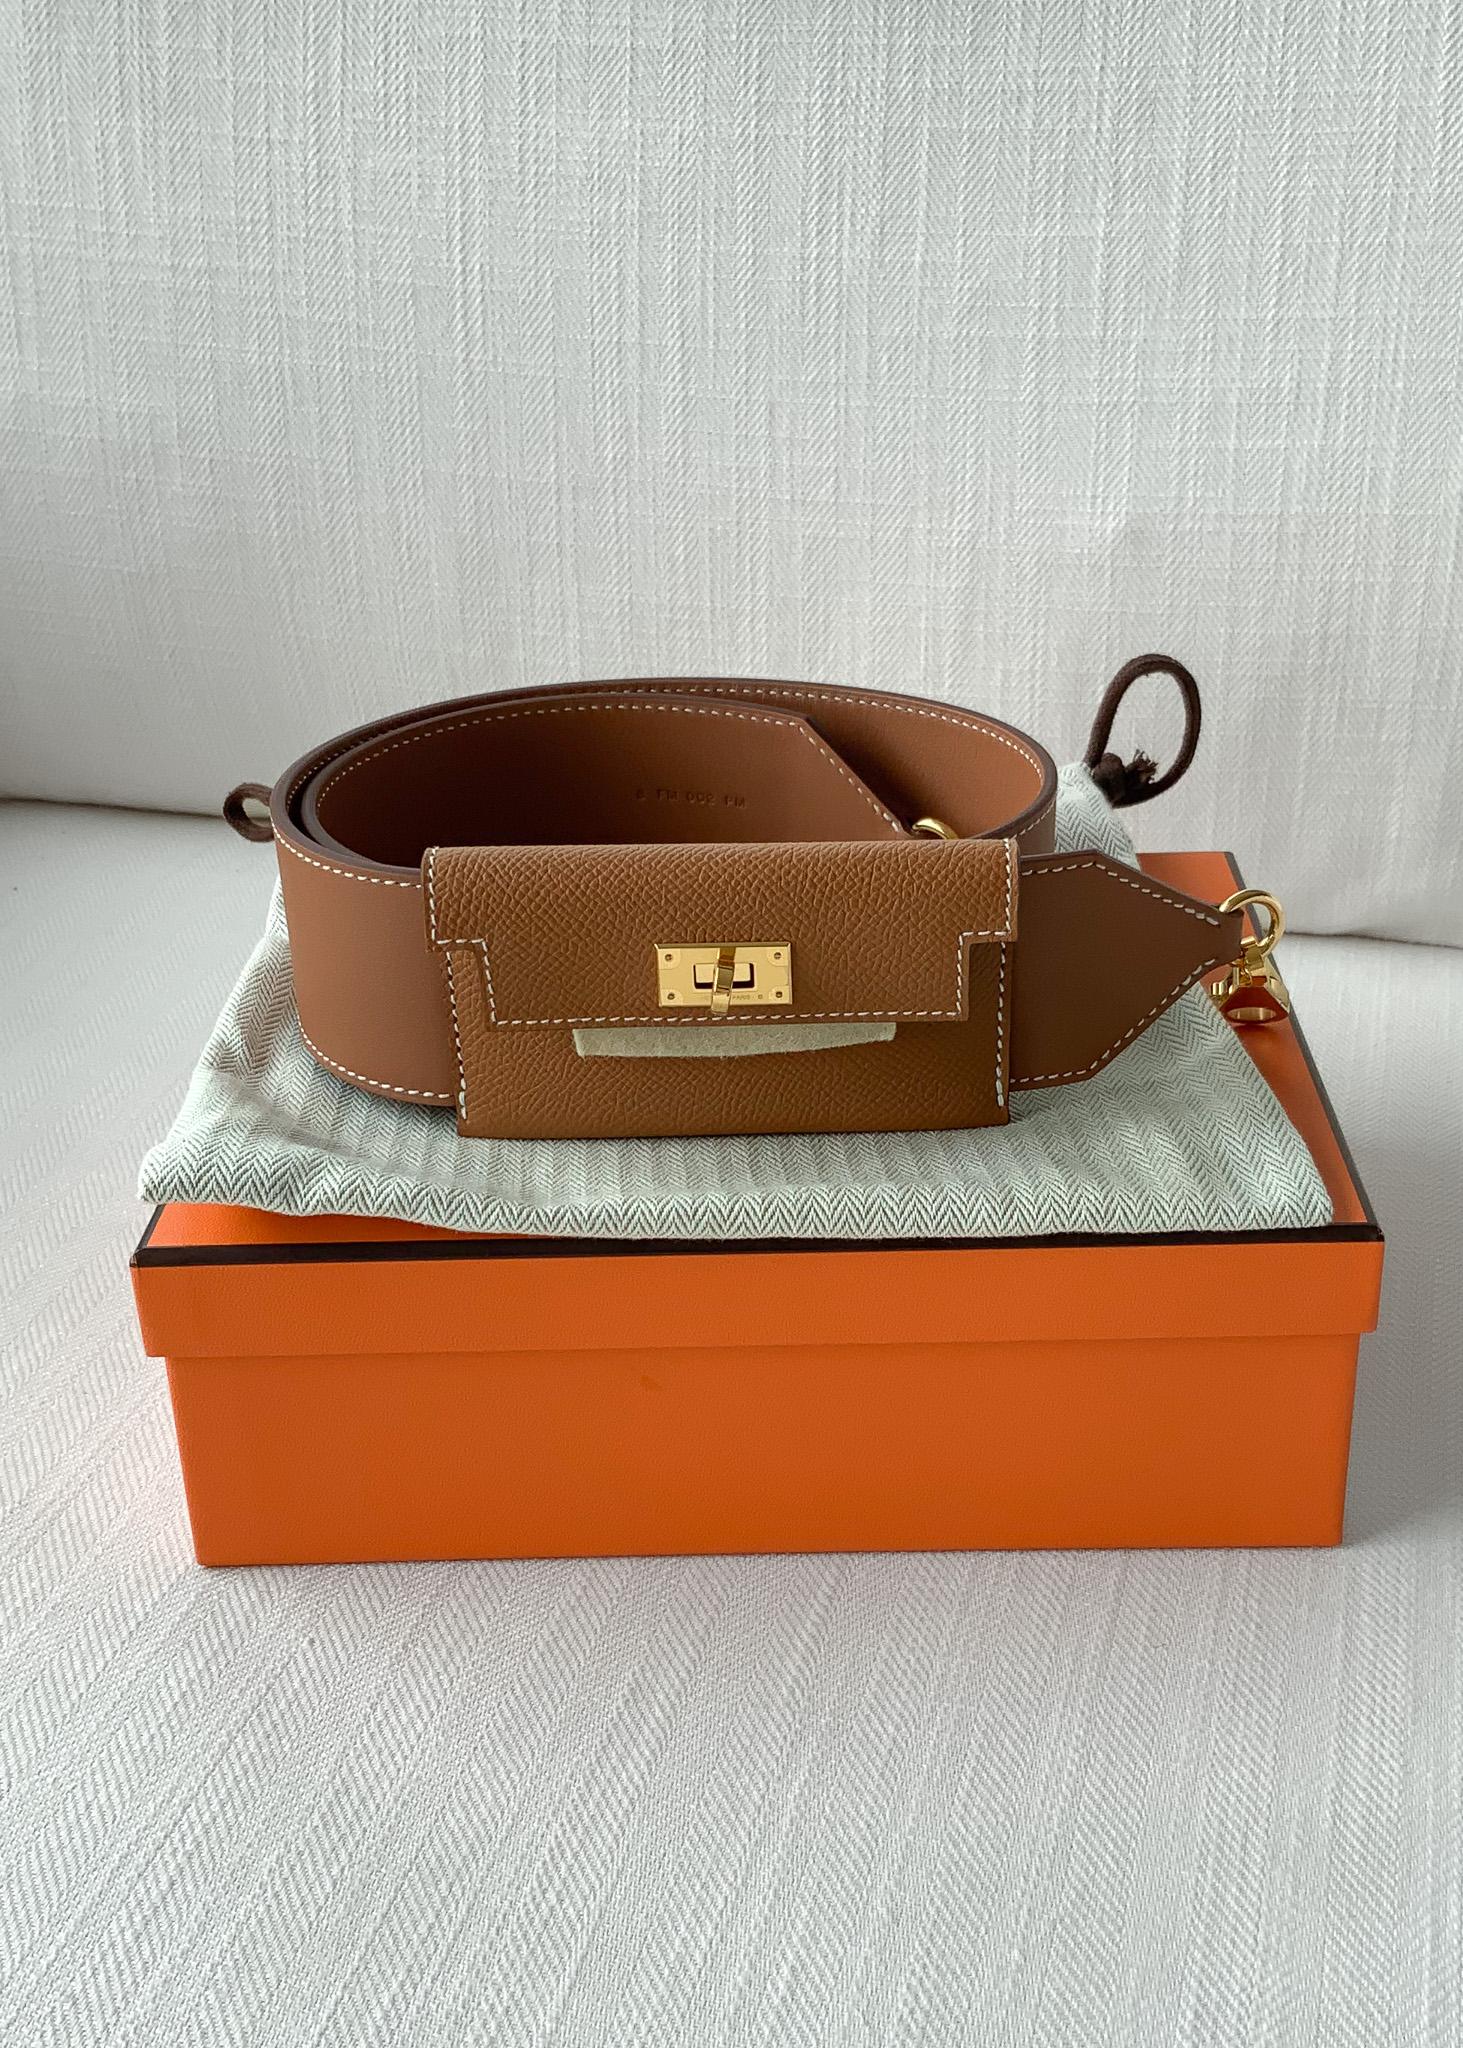 Shop this Hermès Kelly Pocket Bag Strap in the most classic colour way of Gold on Gold. The Kelly Pocket strap is the perfect accessory for your bag, combining a practical card older and strap together. It is made from Swift leather, with an epsom